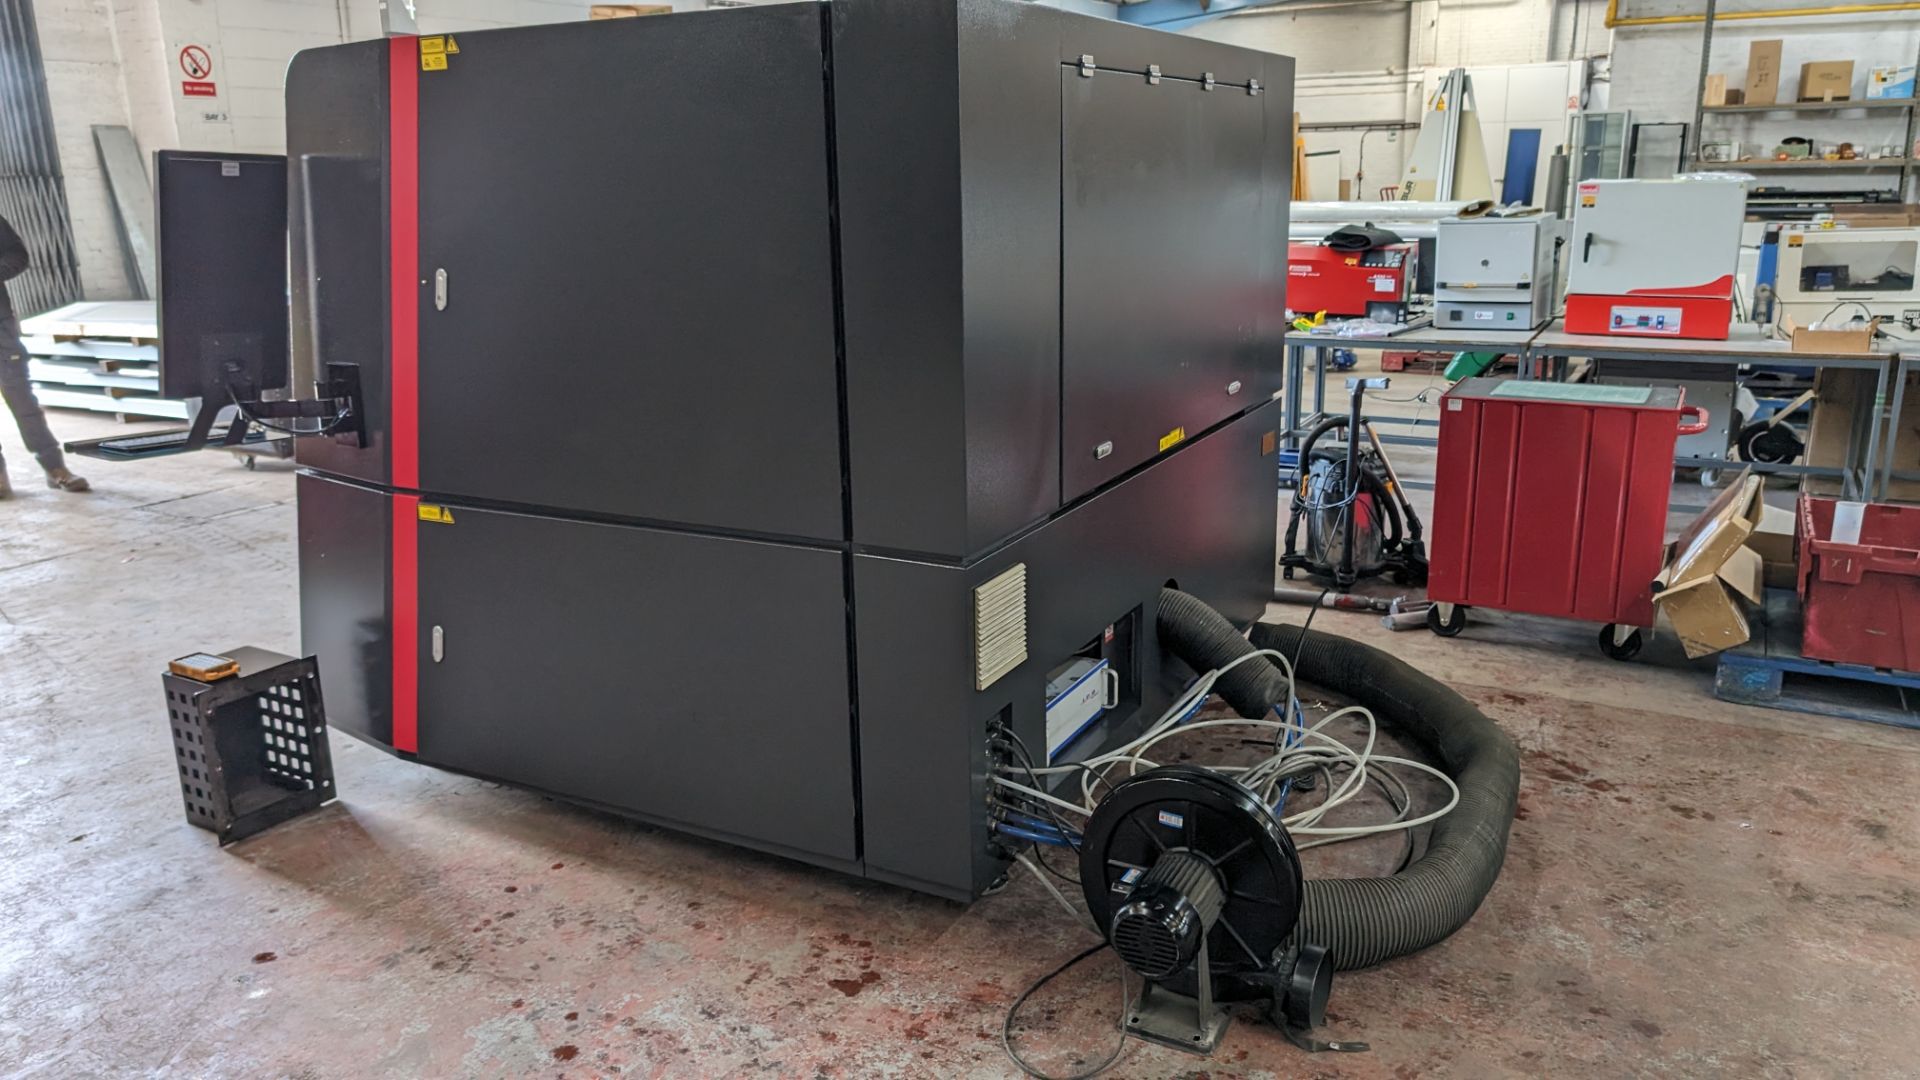 2021 HPC LS1390 1000W IPG fibre laser cutting machine. Includes external chiller. Includes extractio - Image 5 of 41